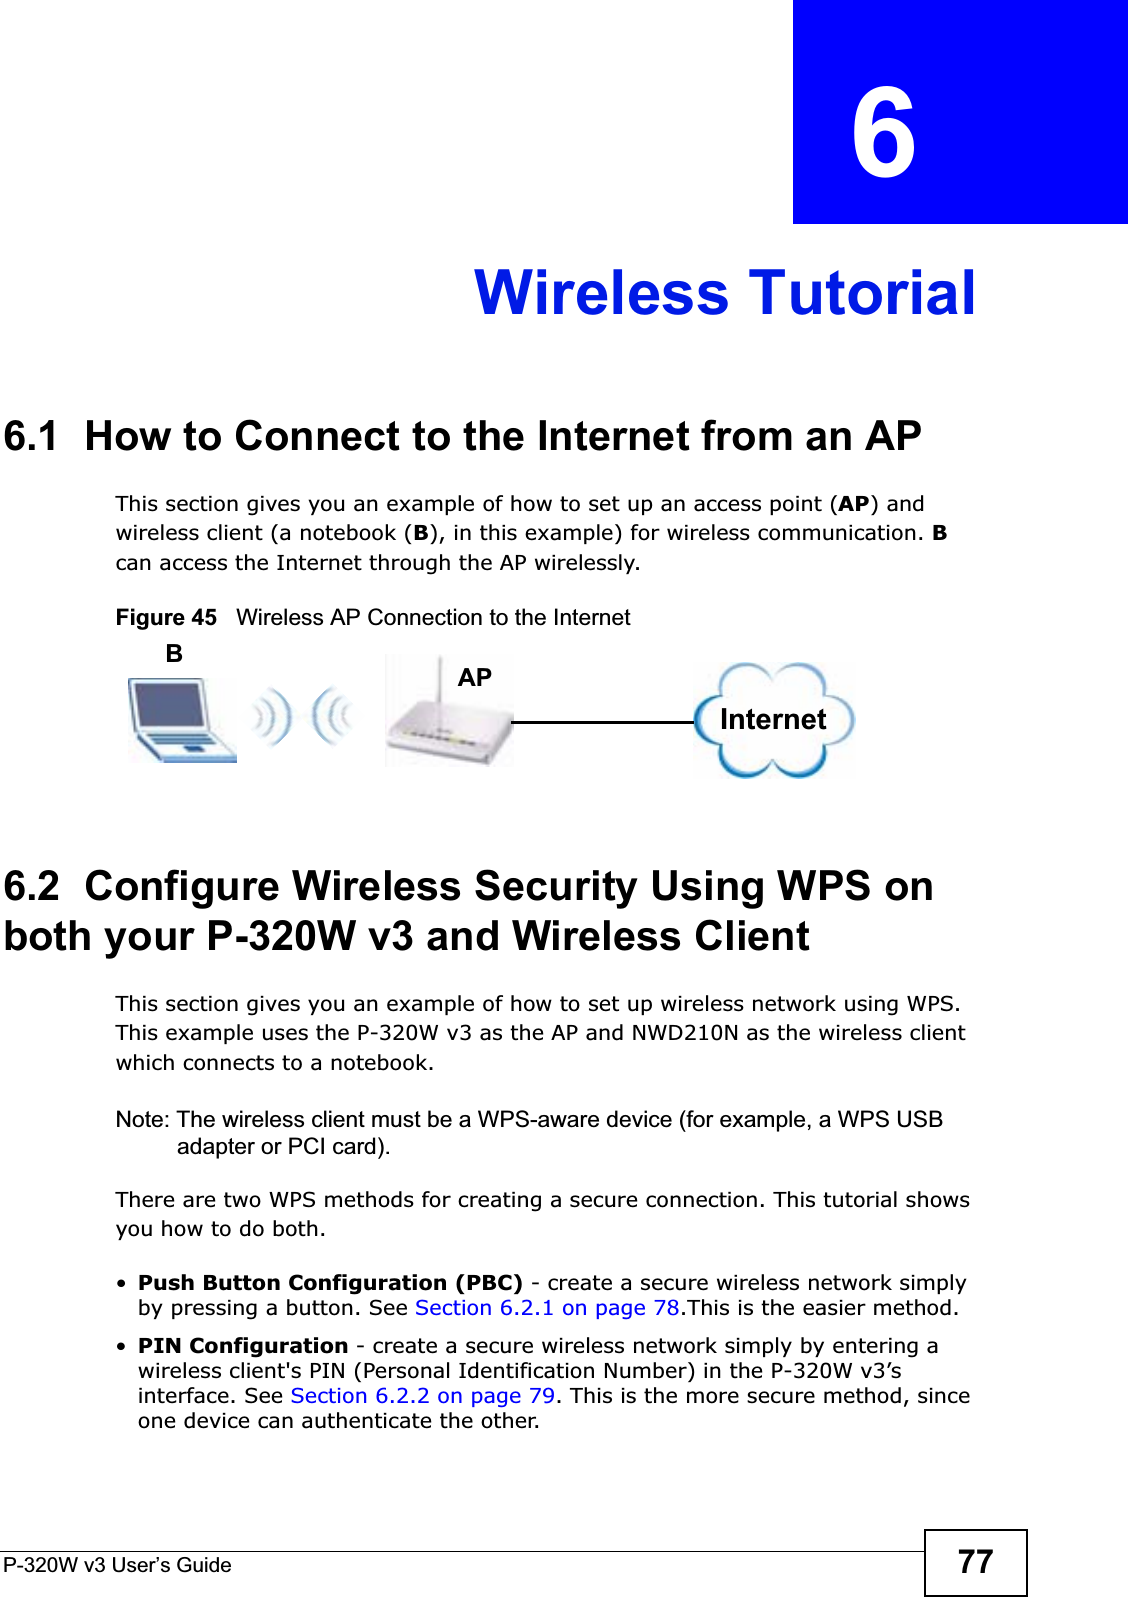 P-320W v3 User’s Guide 77CHAPTER  6 Wireless Tutorial6.1  How to Connect to the Internet from an APThis section gives you an example of how to set up an access point (AP) and wireless client (a notebook (B), in this example) for wireless communication. Bcan access the Internet through the AP wirelessly. Figure 45   Wireless AP Connection to the Internet6.2  Configure Wireless Security Using WPS on both your P-320W v3 and Wireless ClientThis section gives you an example of how to set up wireless network using WPS. This example uses the P-320W v3 as the AP and NWD210N as the wireless client which connects to a notebook. Note: The wireless client must be a WPS-aware device (for example, a WPS USB adapter or PCI card).There are two WPS methods for creating a secure connection. This tutorial shows you how to do both.•Push Button Configuration (PBC) - create a secure wireless network simply by pressing a button. See Section 6.2.1 on page 78.This is the easier method.•PIN Configuration - create a secure wireless network simply by entering a wireless client&apos;s PIN (Personal Identification Number) in the P-320W v3’s interface. See Section 6.2.2 on page 79. This is the more secure method, since one device can authenticate the other.InternetAPB